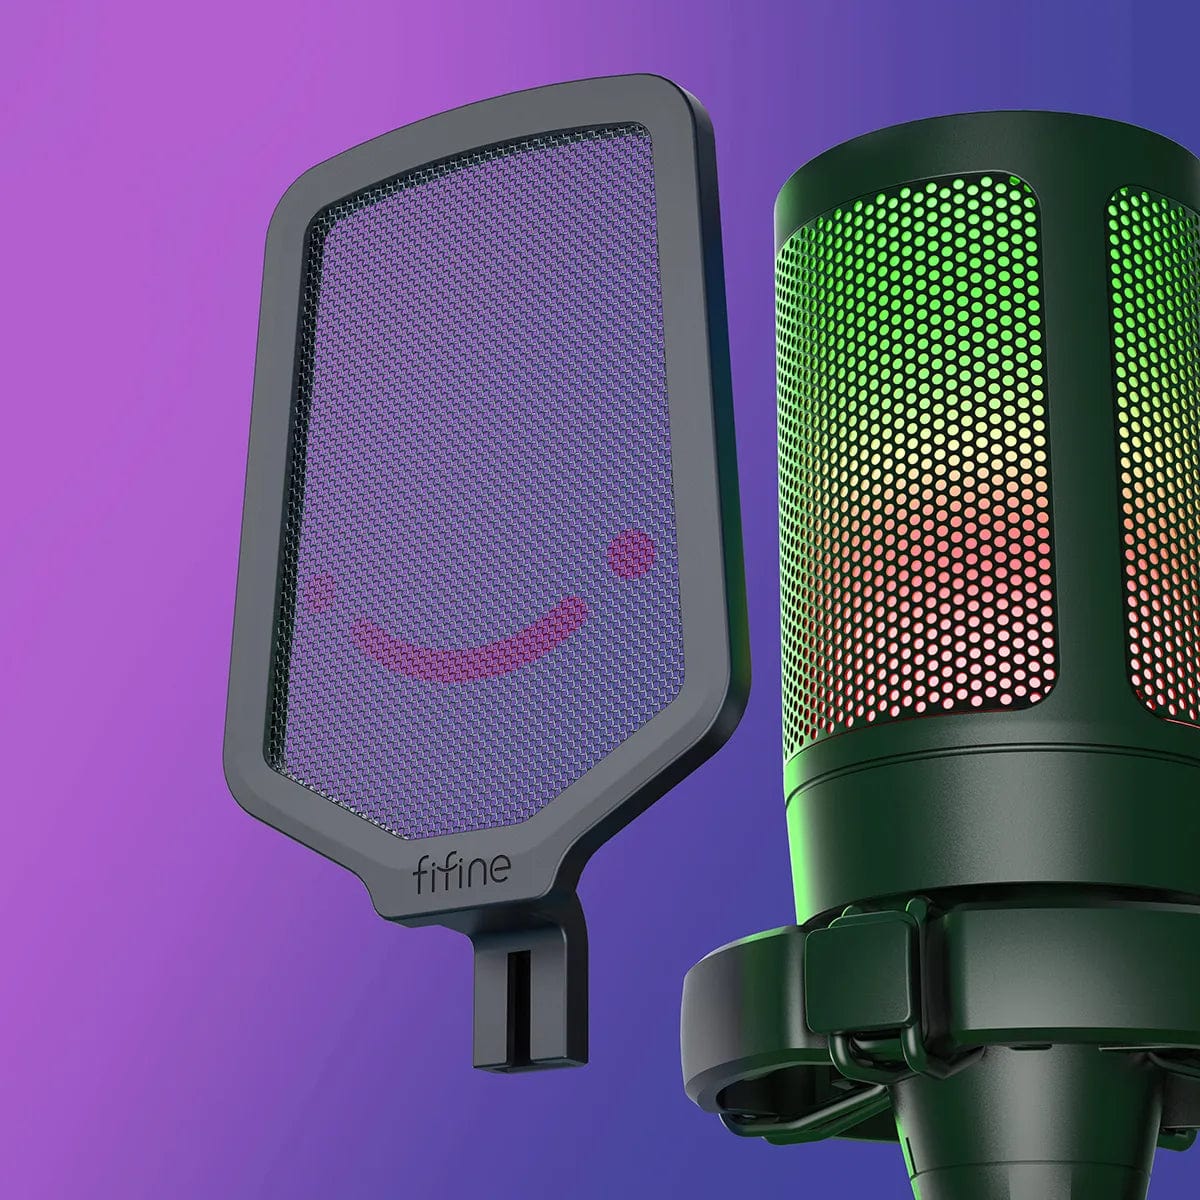 Home Finesse Level Up Your Stream! FIFINE Ampligame USB Microphone - Christmas Gift for Gamers